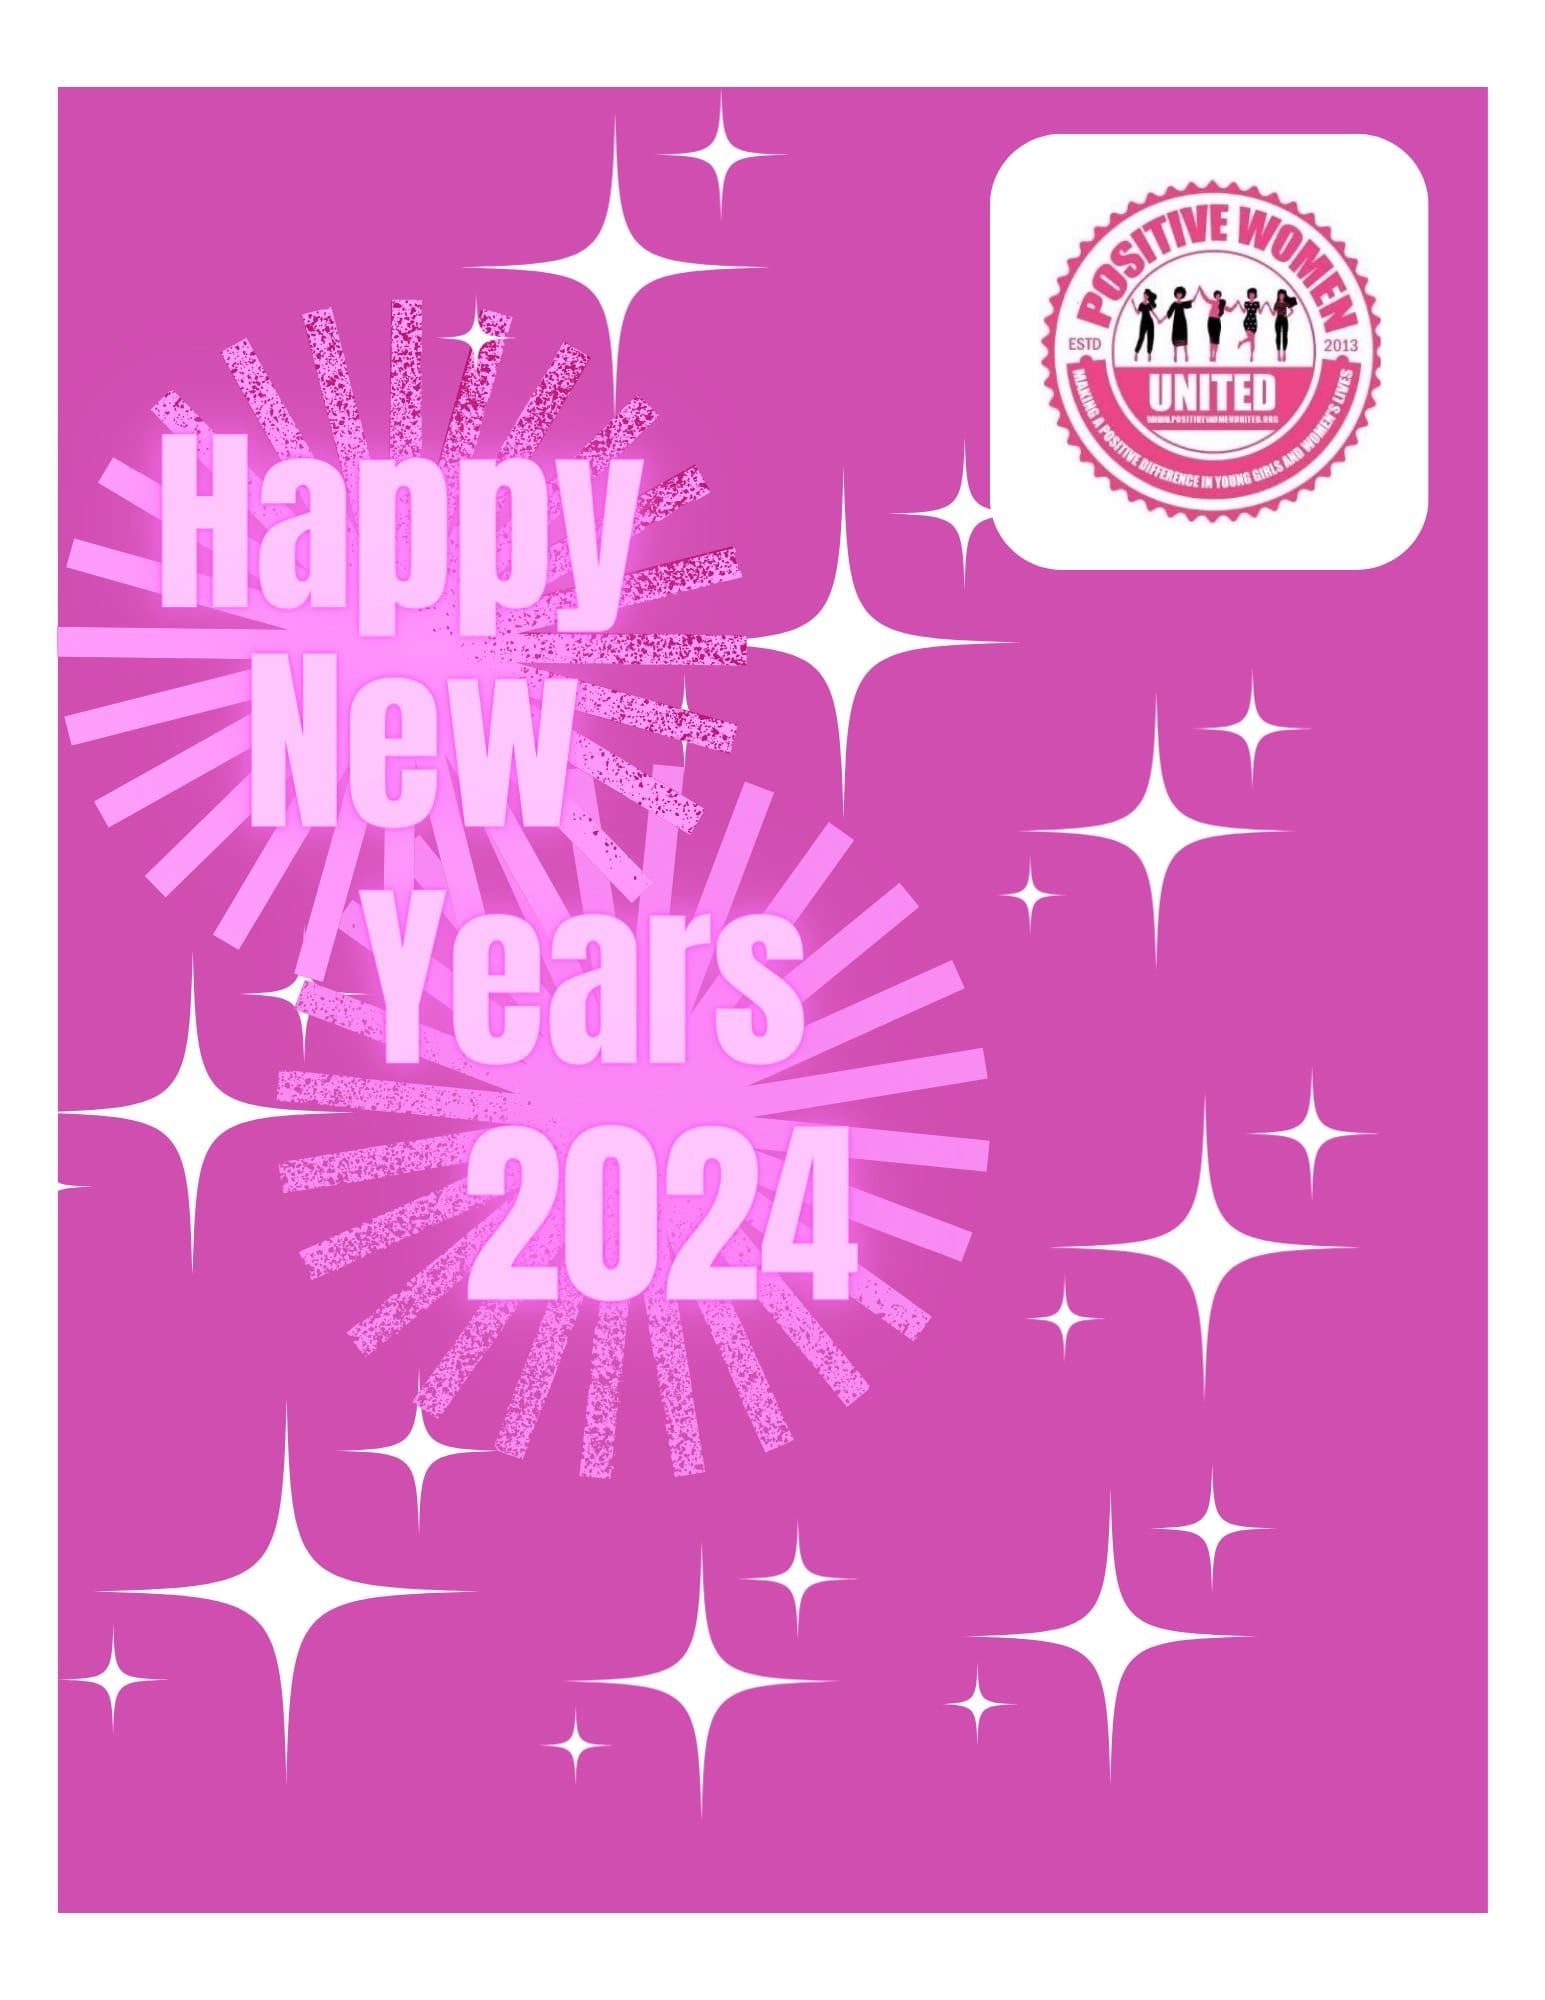 Happy New Year 2024 From Positive Women United!